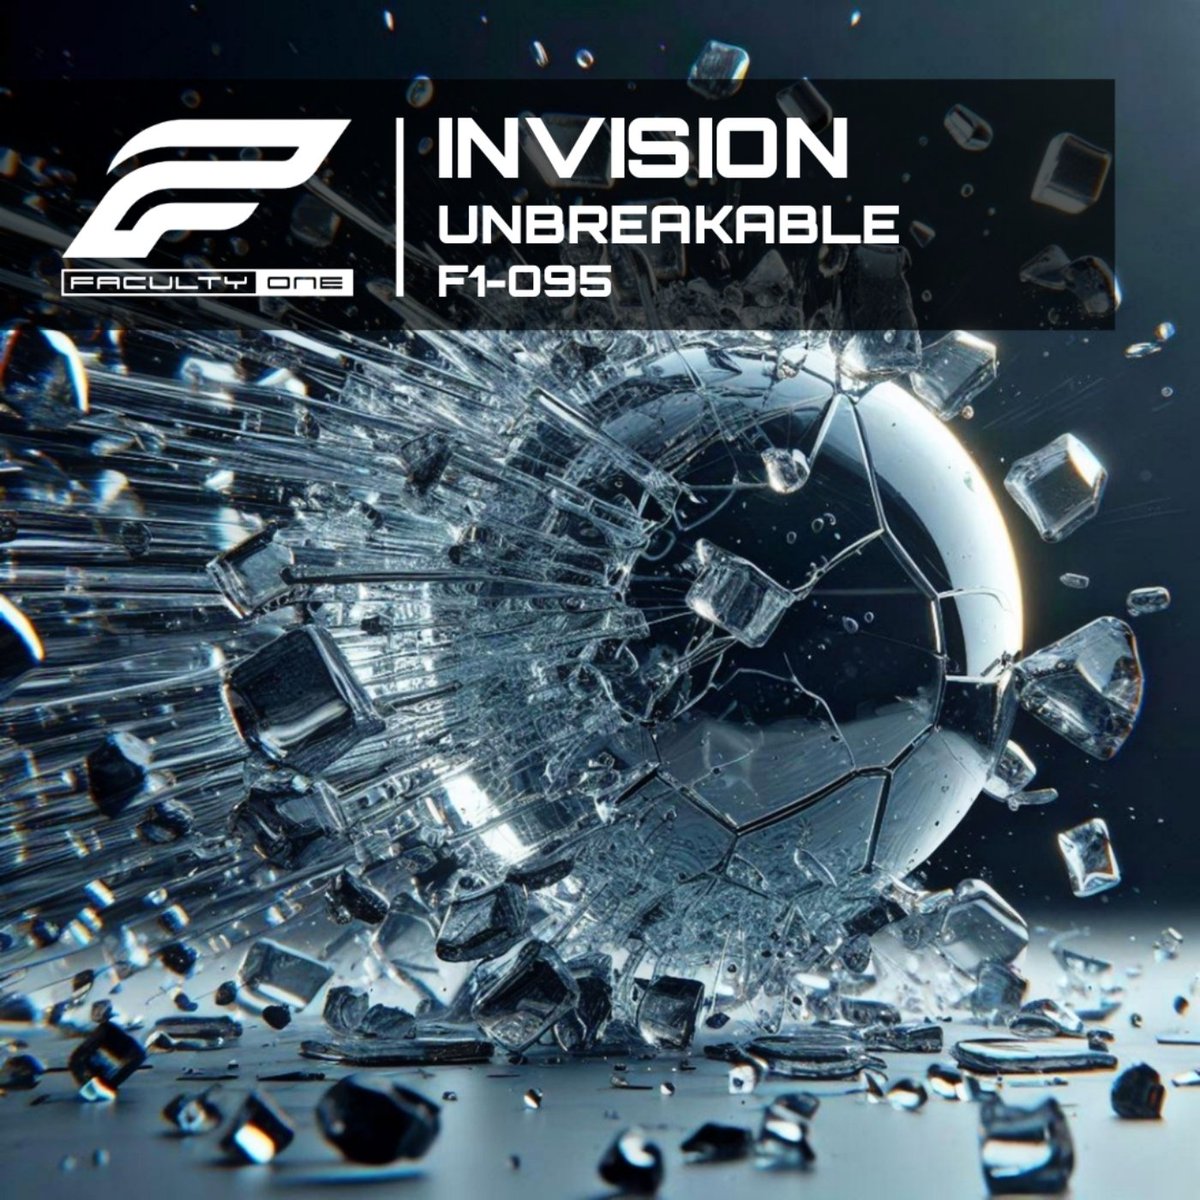 The latest Faculty One release 'UNBREAKABLE' from InVision is available now exclusively at Toolbox Digital!

Check it out here:
bit.ly/unbreakablefac…

#hardhouse #harddance #toolboxdigital #newrelease #facultyone